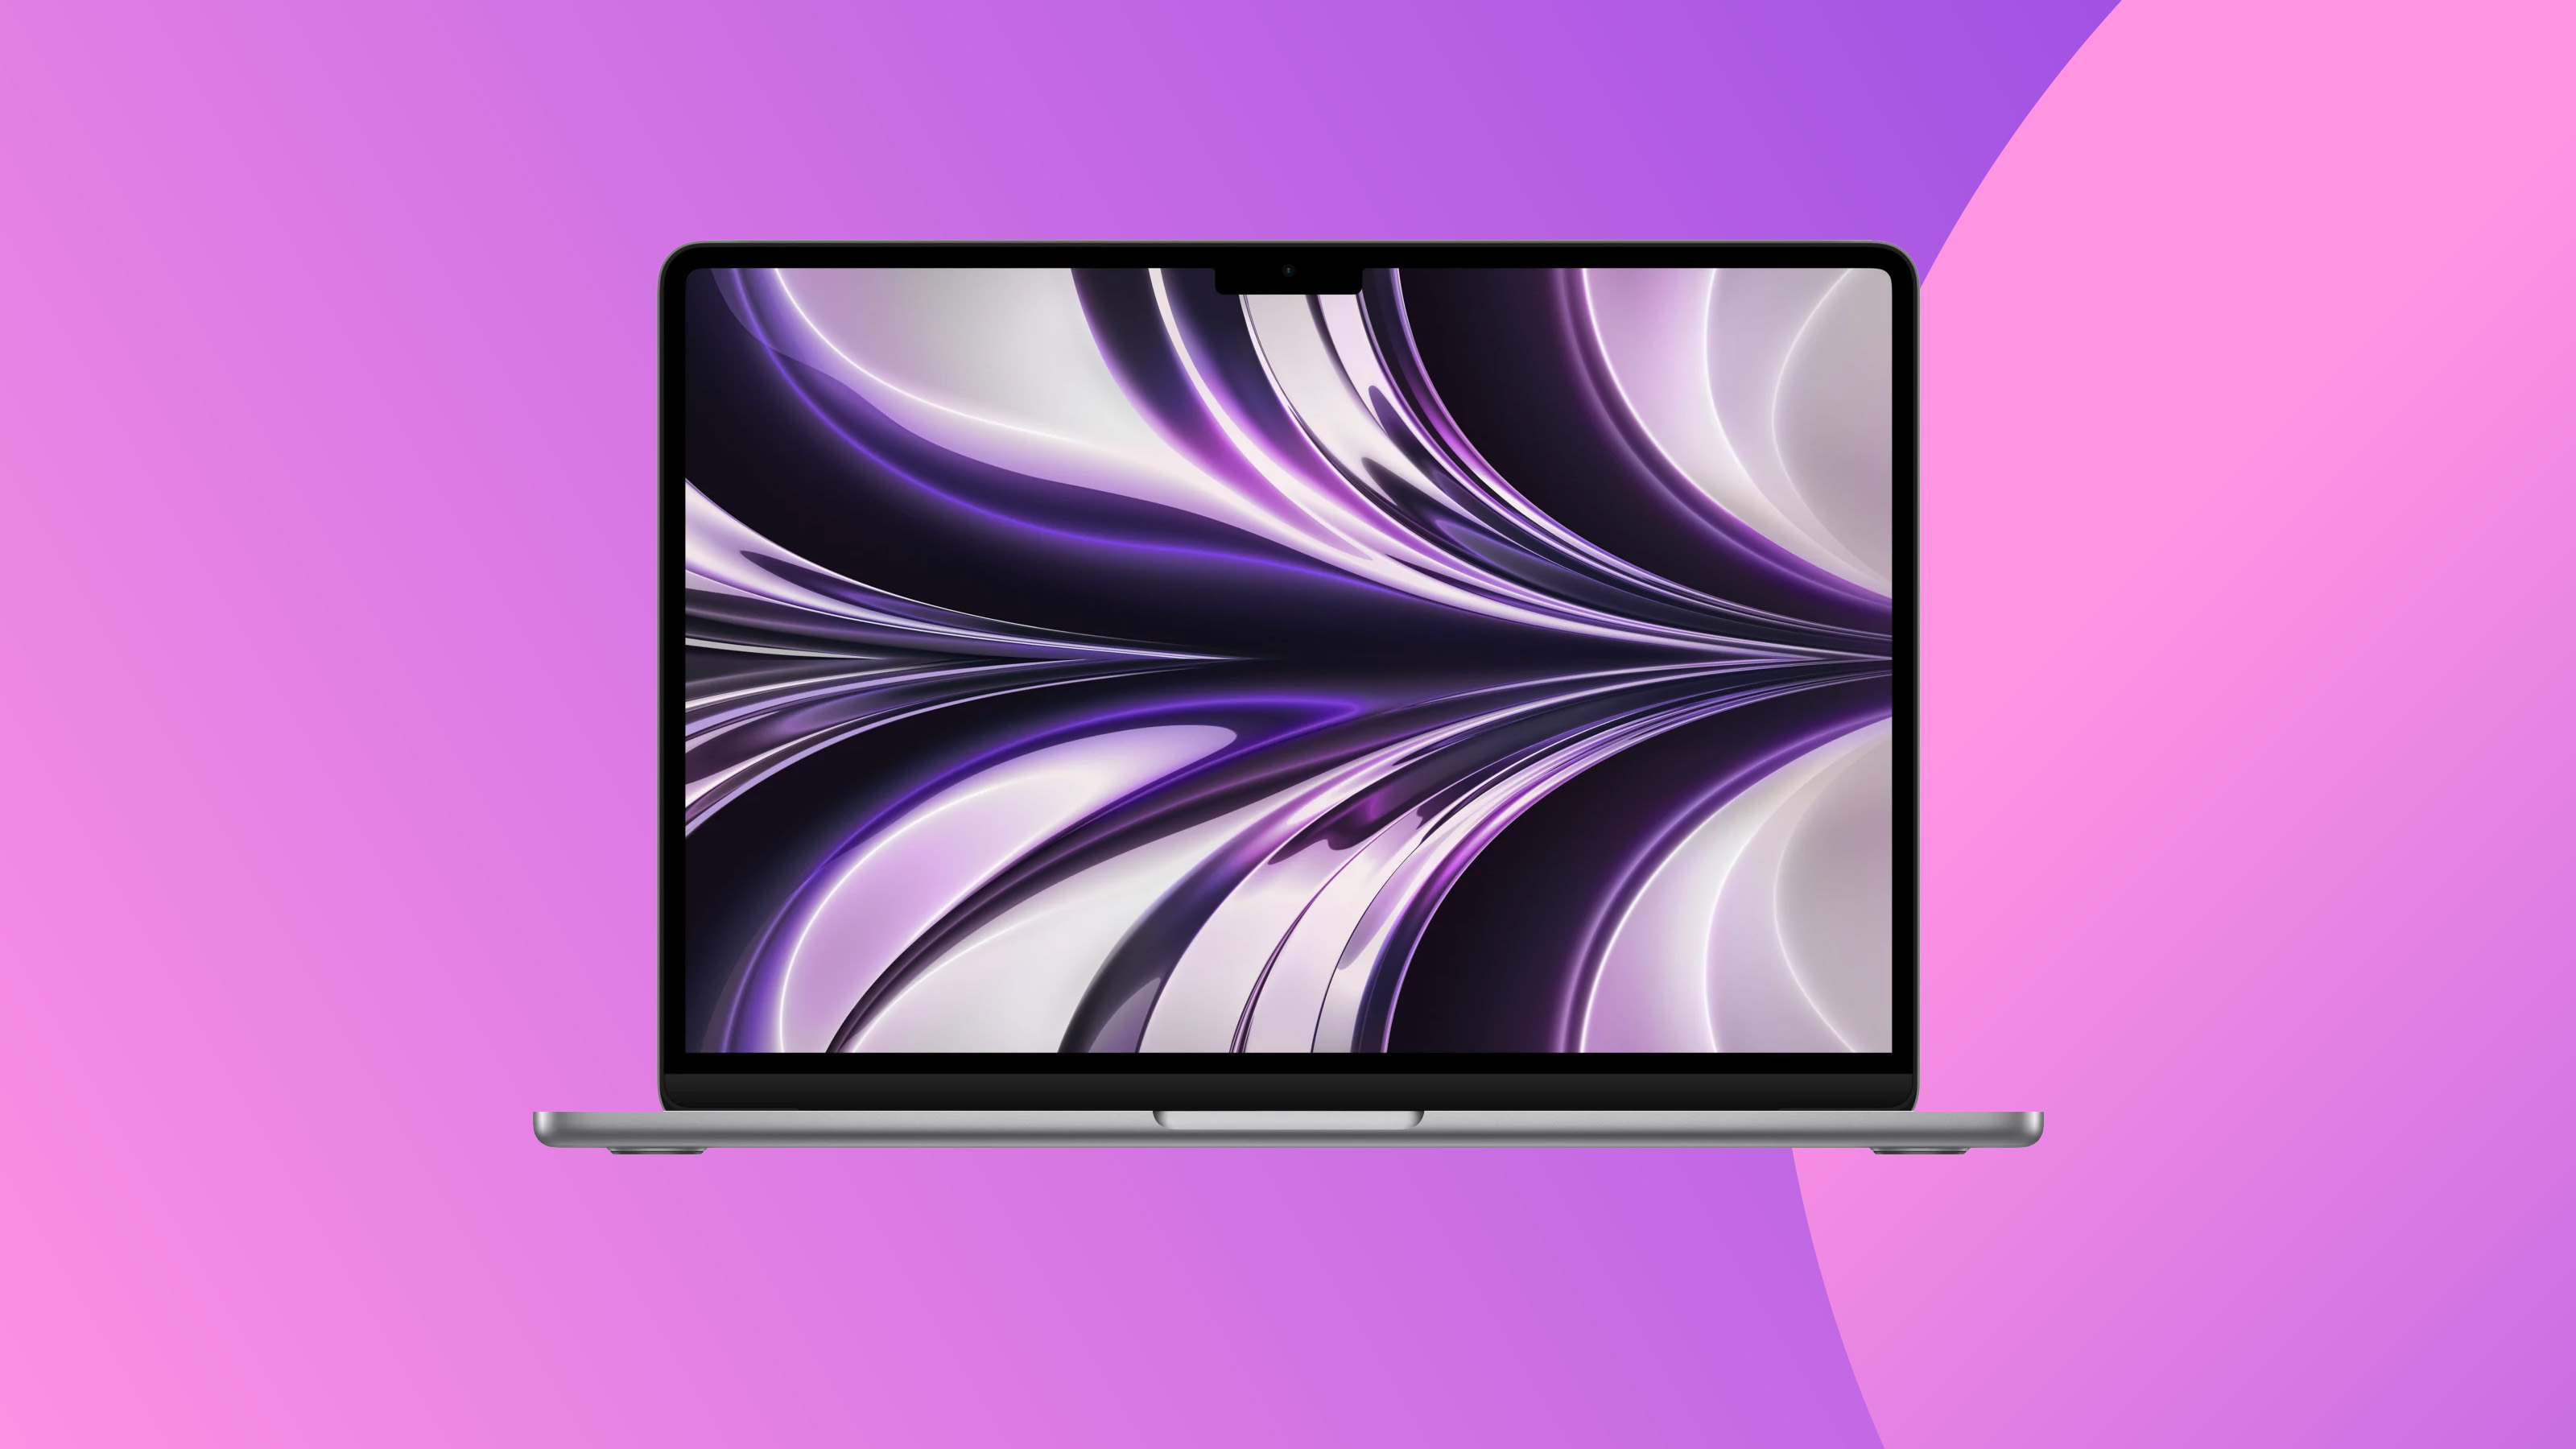 A product image of the MacBook Air on a colorful background